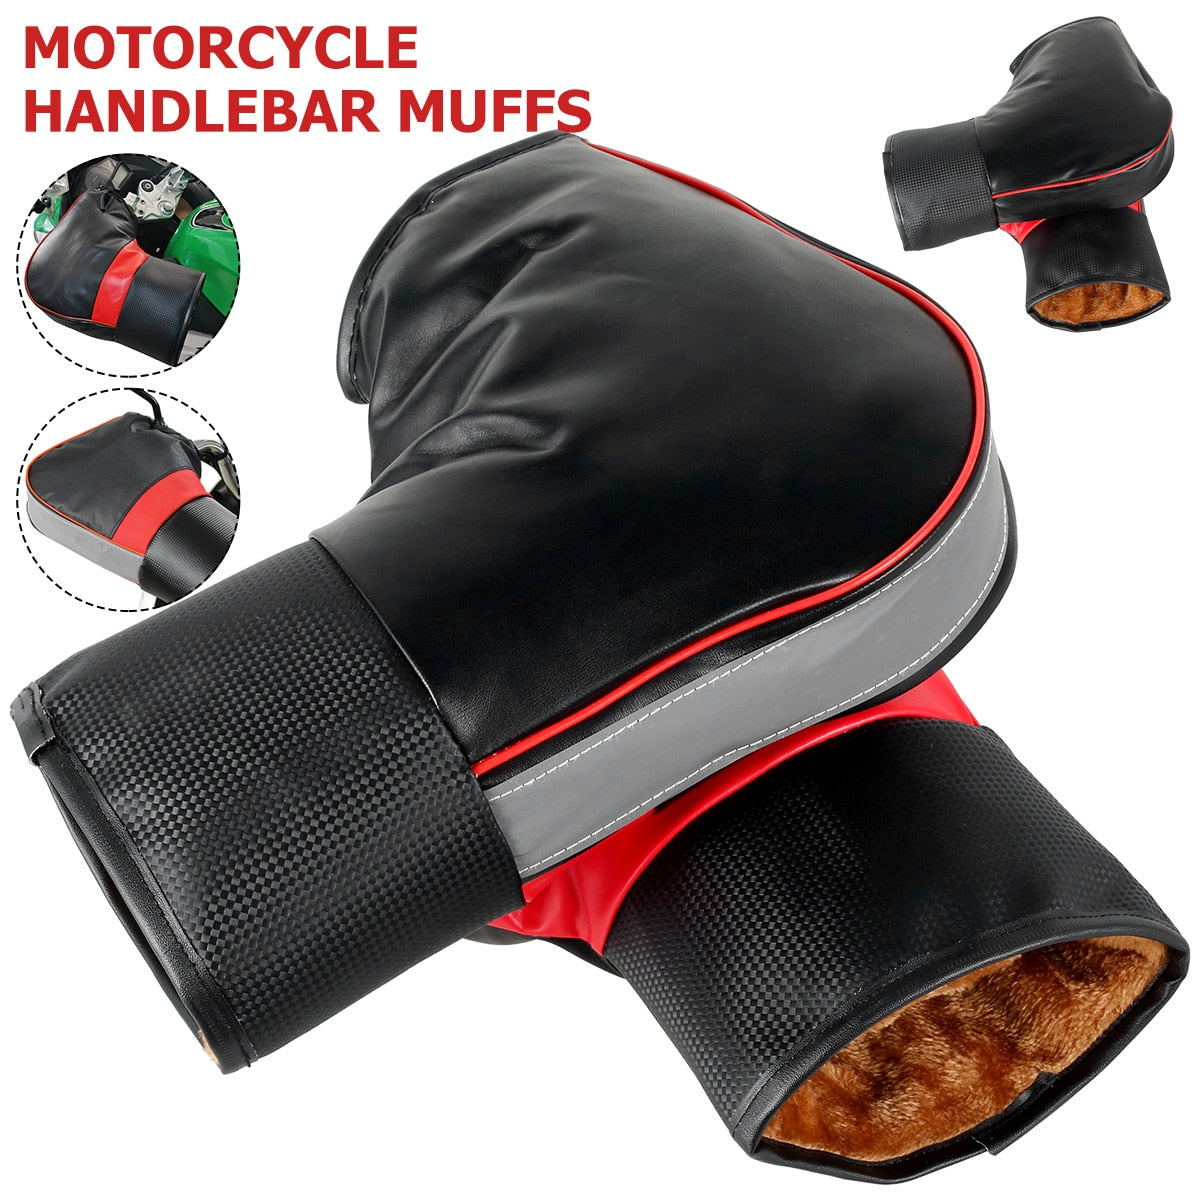 1Pair Motorcycle Handlebar Muffs Protective Motorcycle Scooter Thick Warm Grip